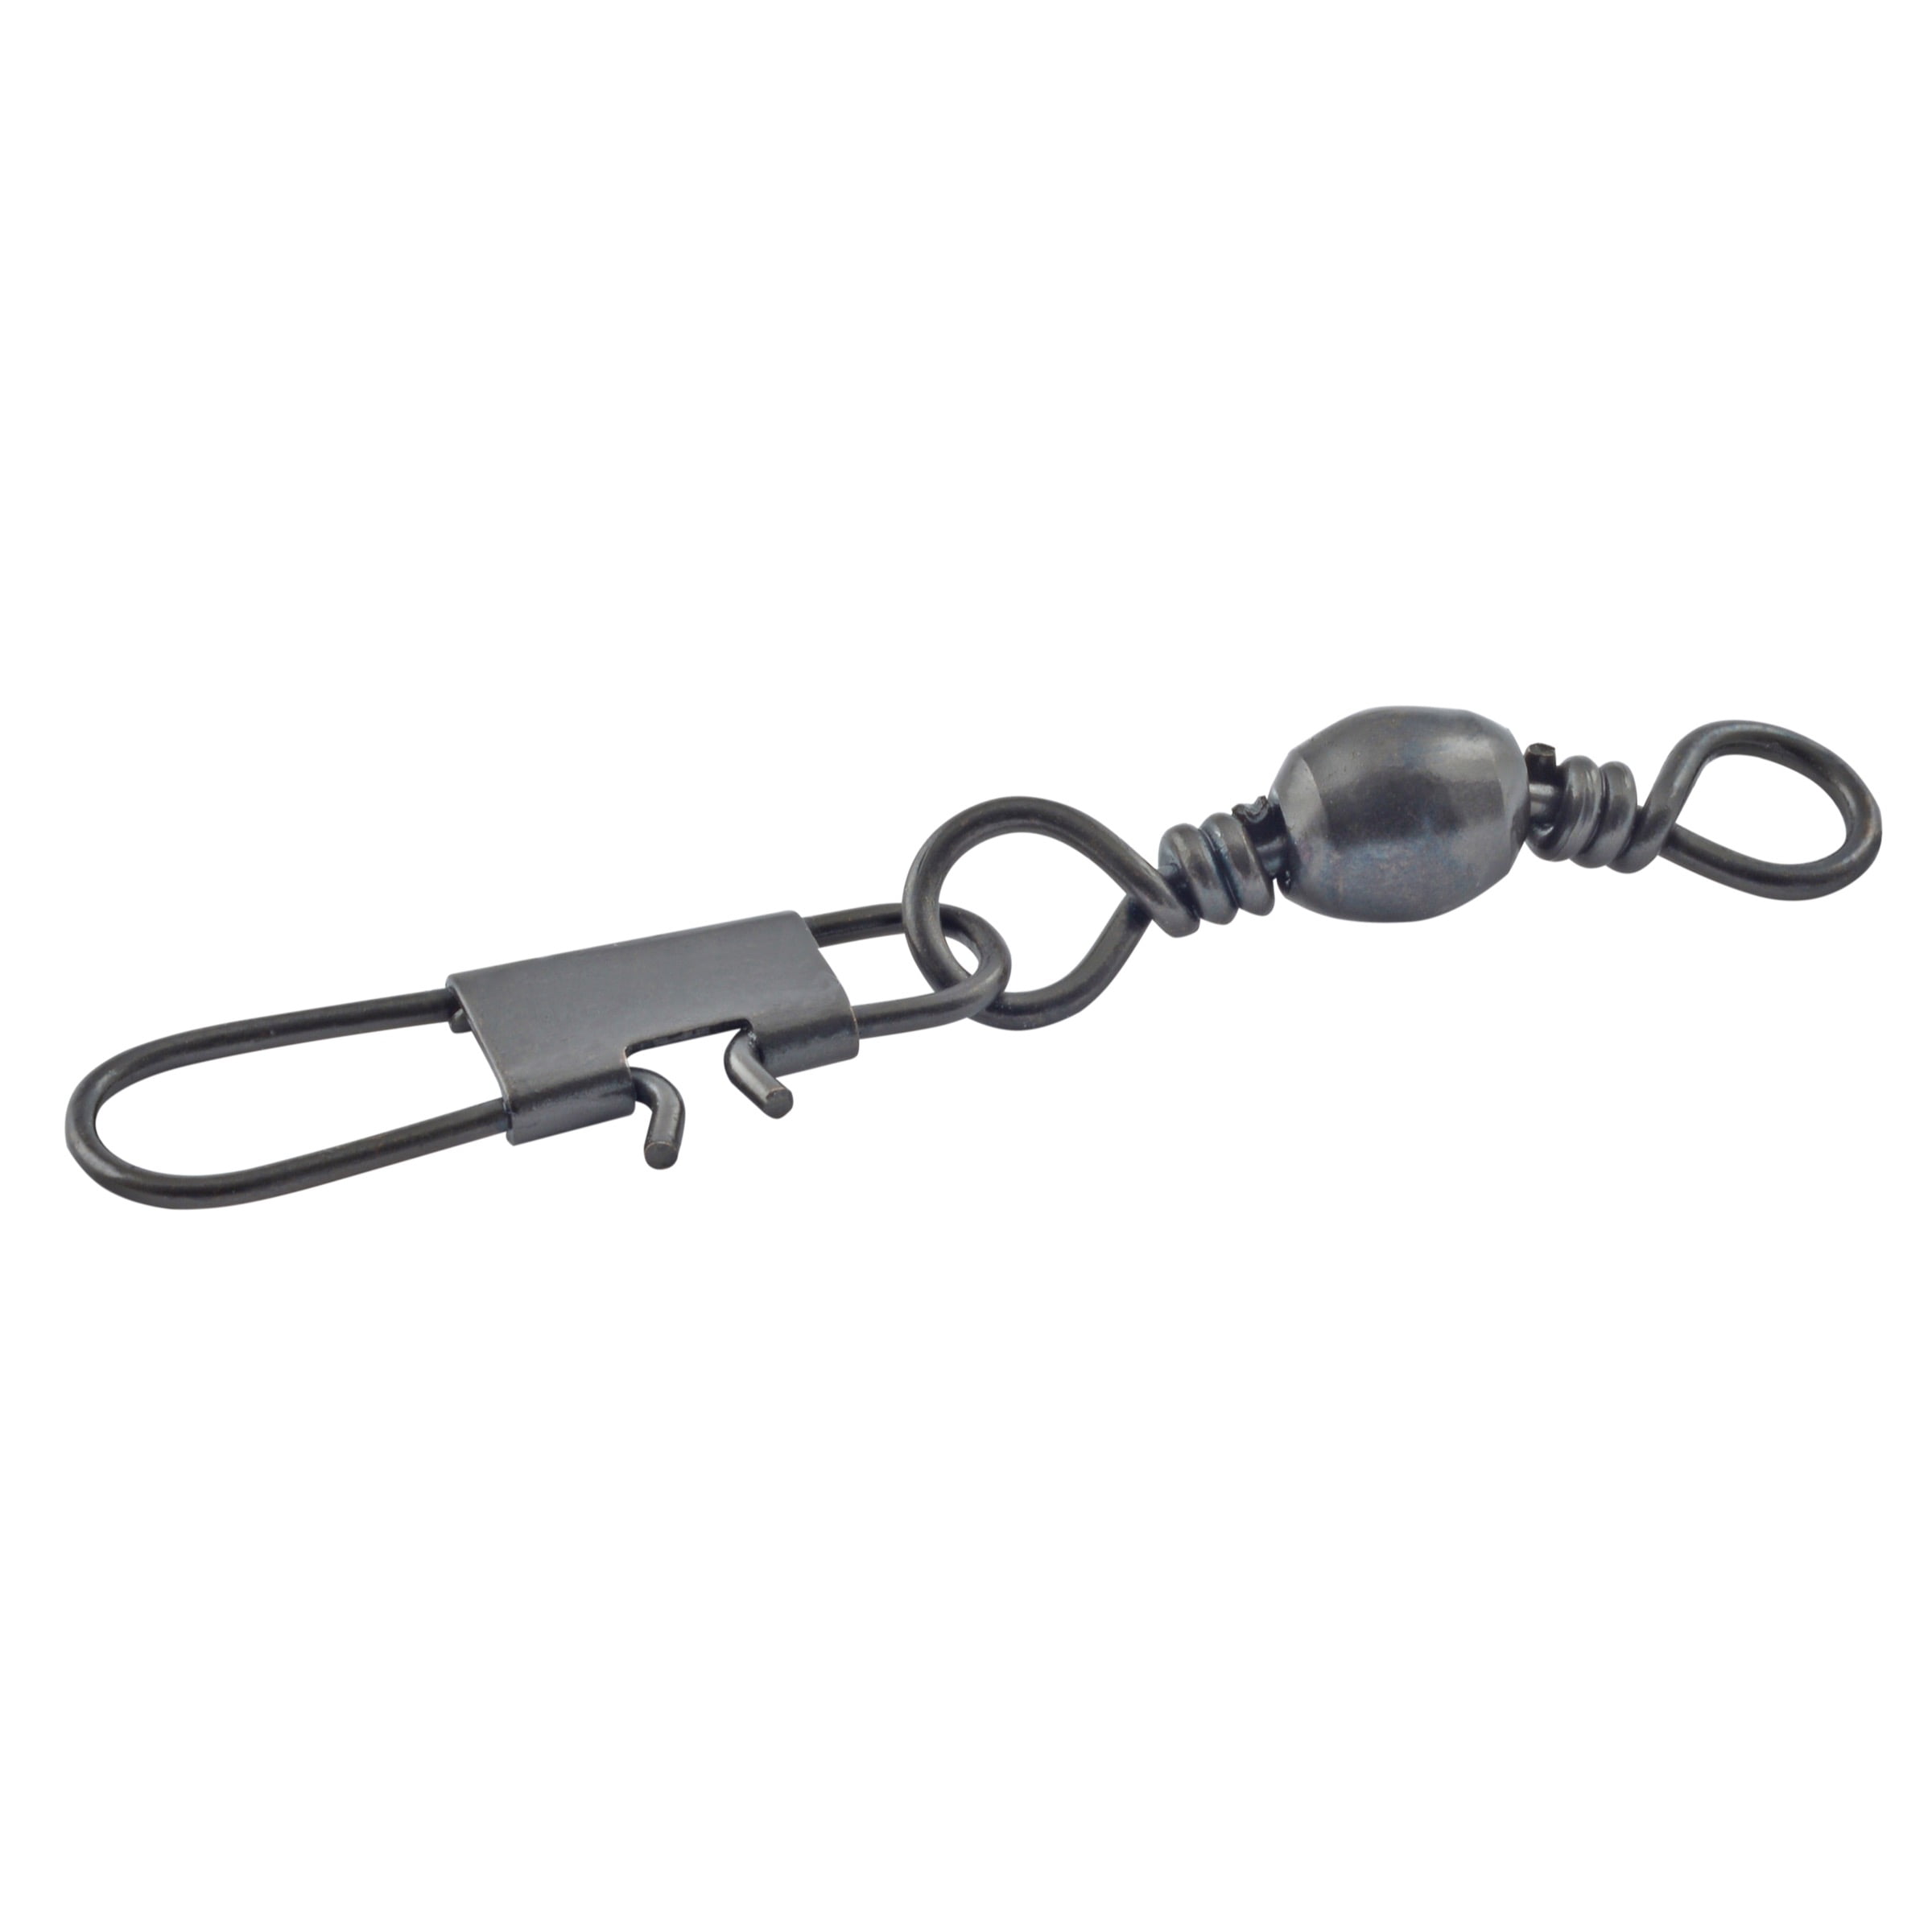 Danielson Barrel Swivels with Safety Snap Fishing Terminal Tackle